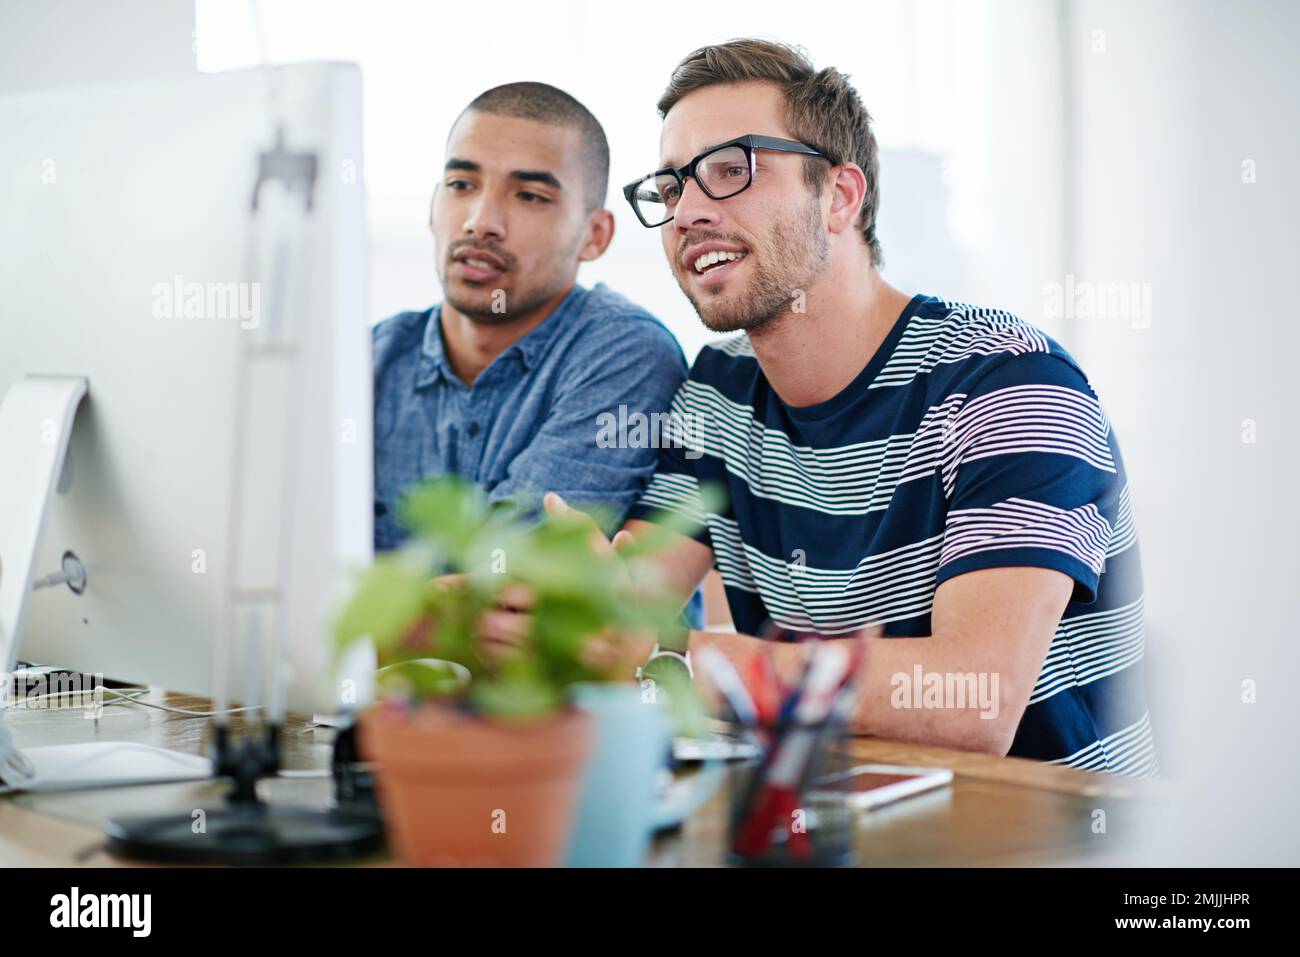 Making every detail perfect. two male designers working together at a computer. Stock Photo